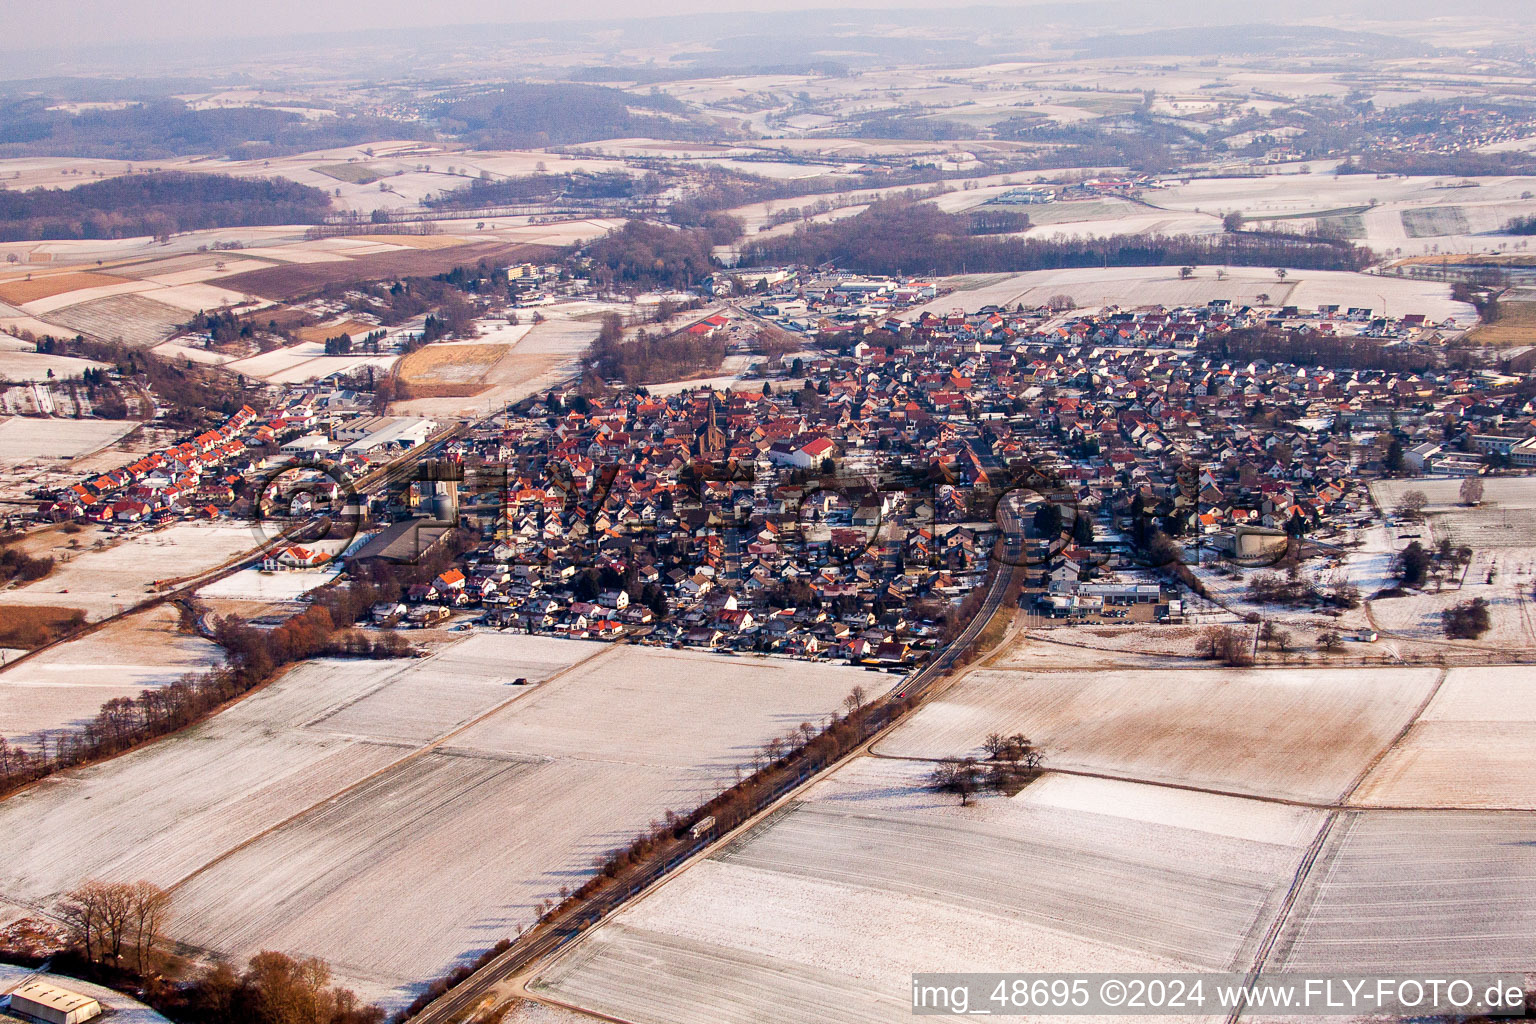 Wintry snowy Village - view on the edge of agricultural fields and farmland in the district Muenzesheim in Kraichtal in the state Baden-Wurttemberg, Germany